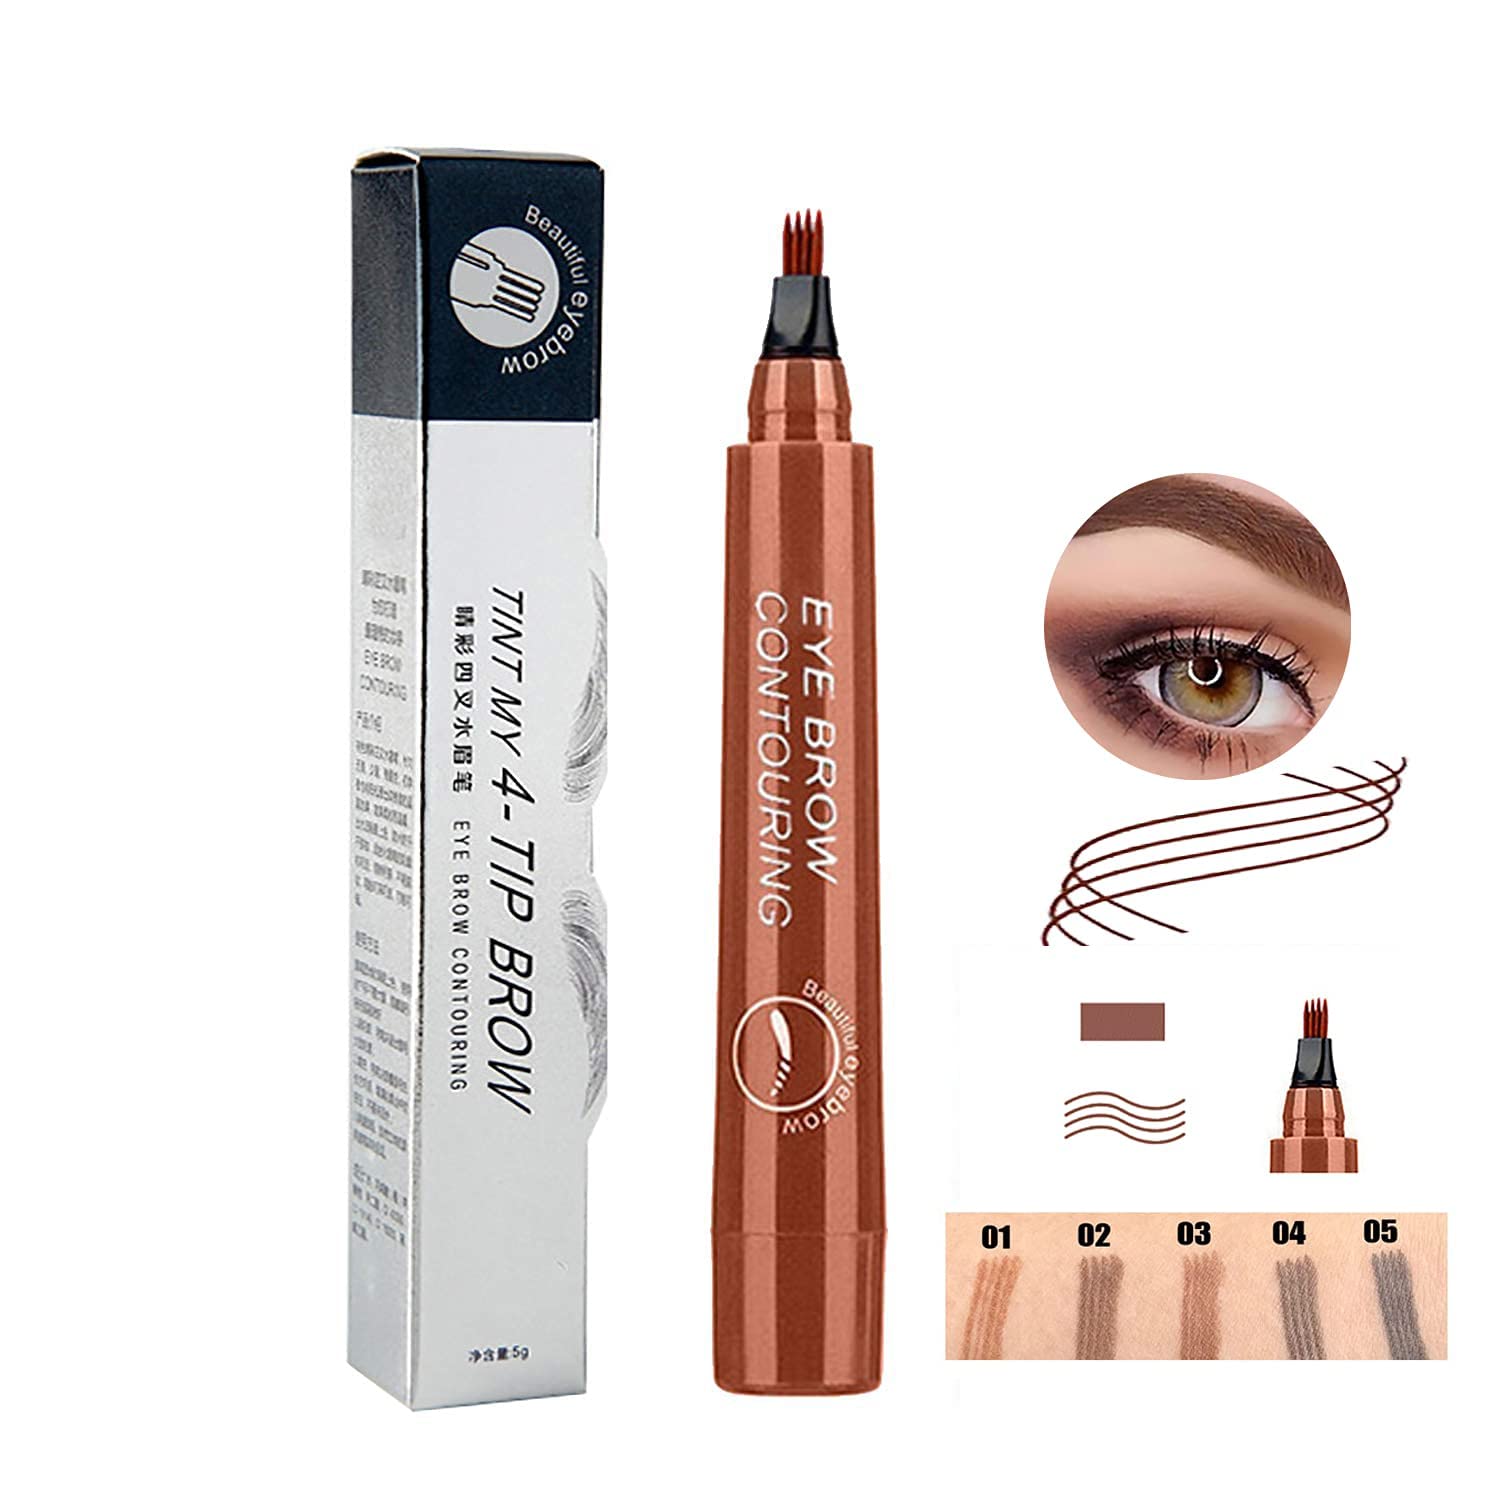 Tukefev 4 Point Eyebrow Wear Waterproof Proof No Colour Microblading Eyebrow Pen Impermeable with Simulation Root Clear Four Claws Explanatory Fading Eyebrows